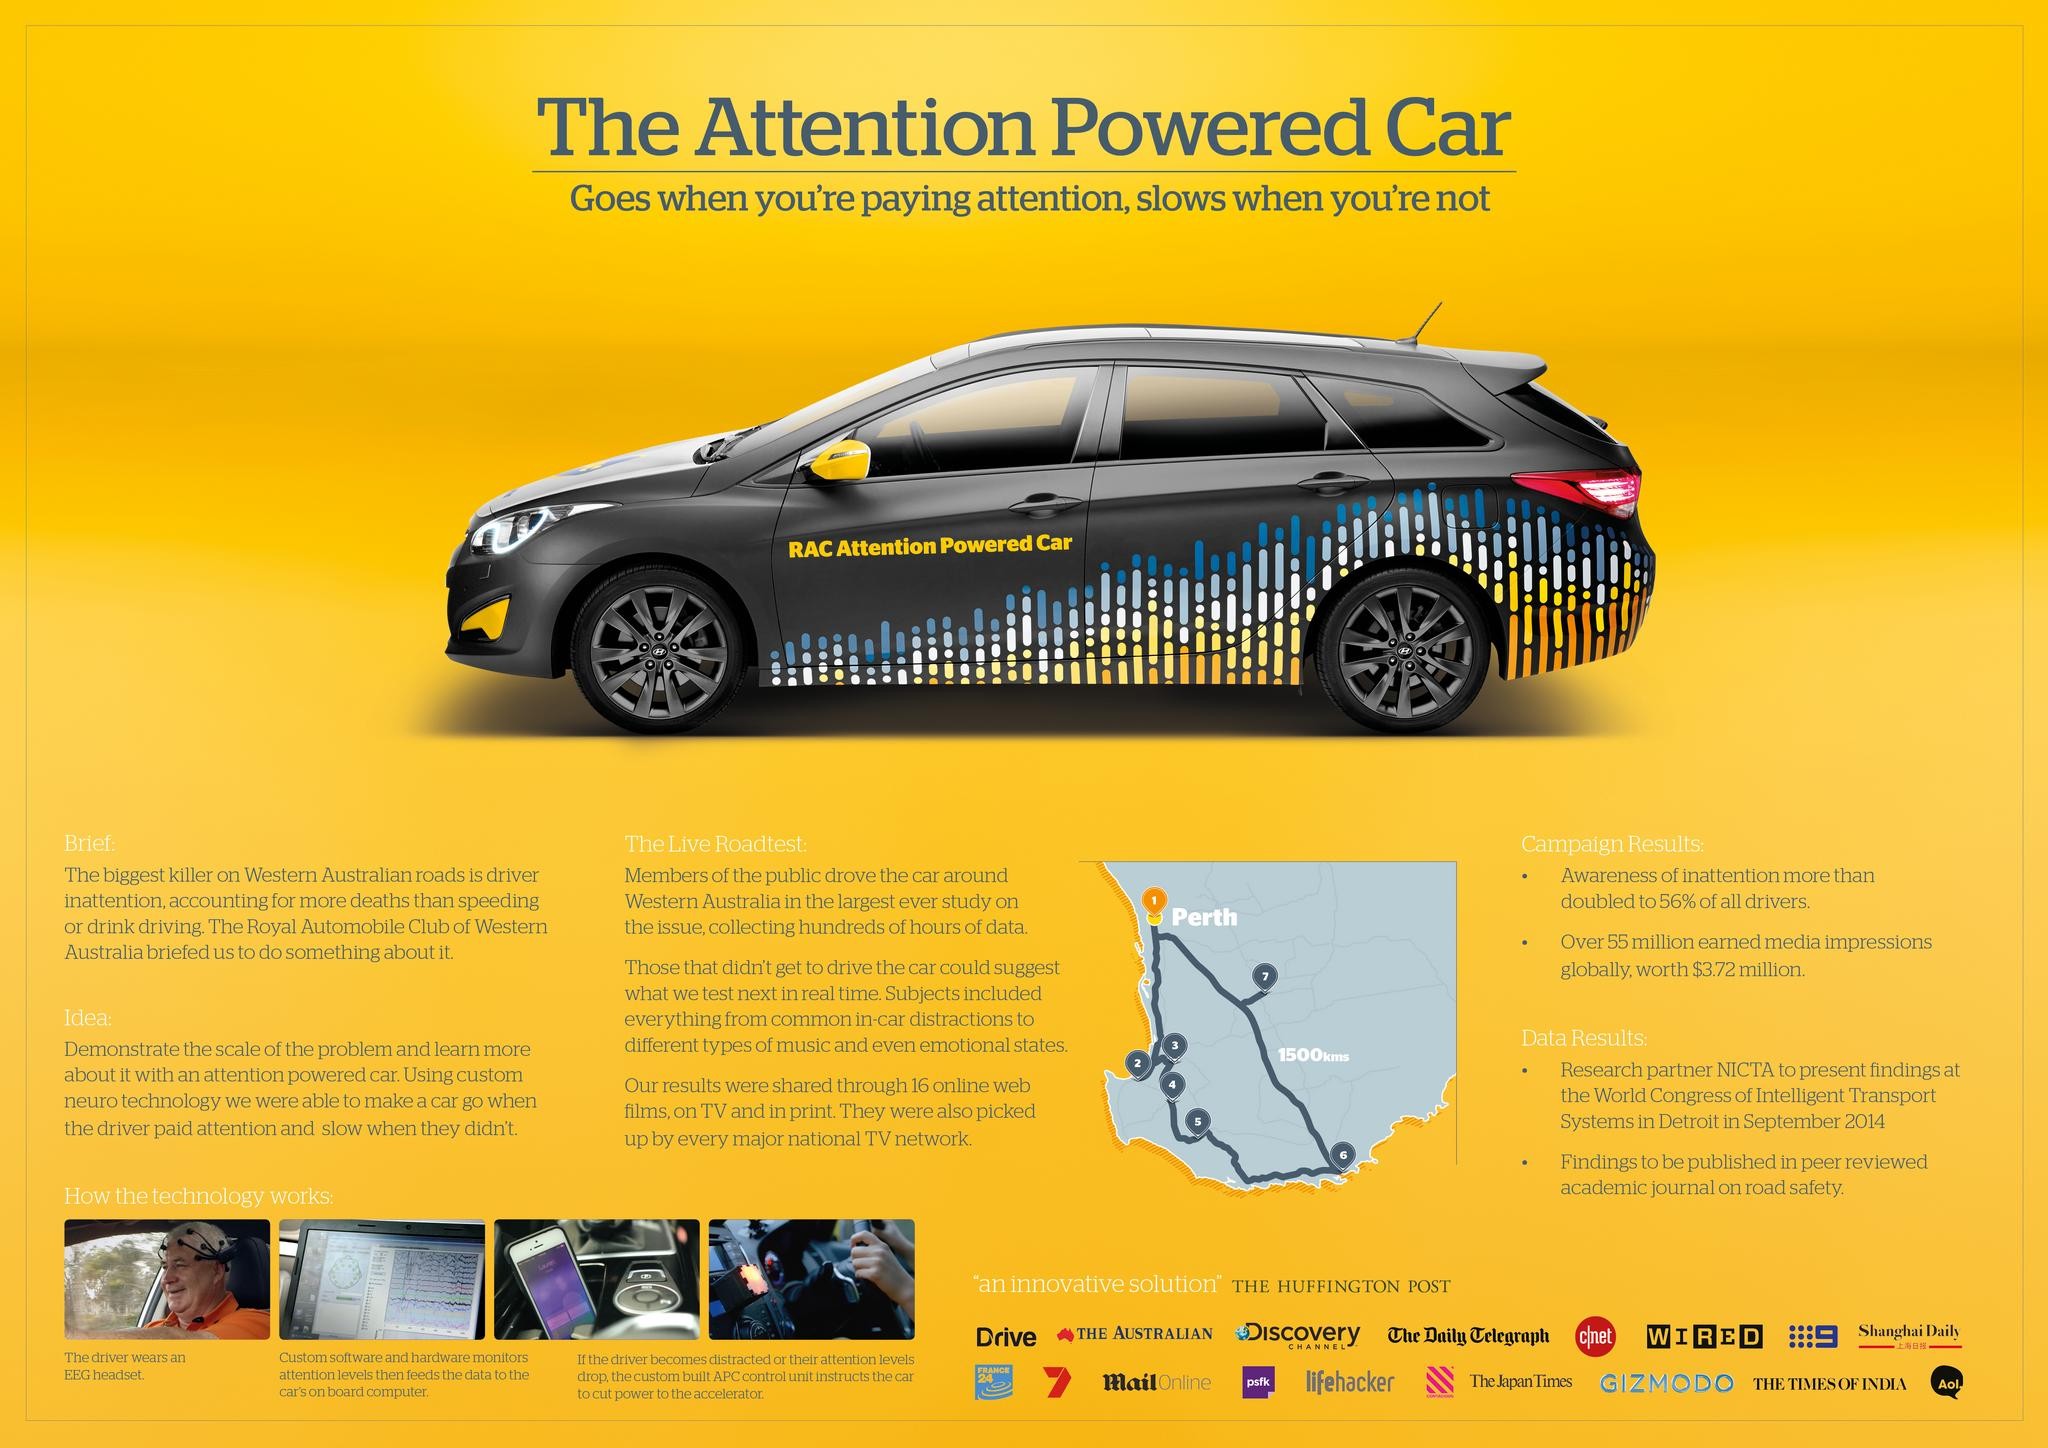 ATTENTION POWERED CAR